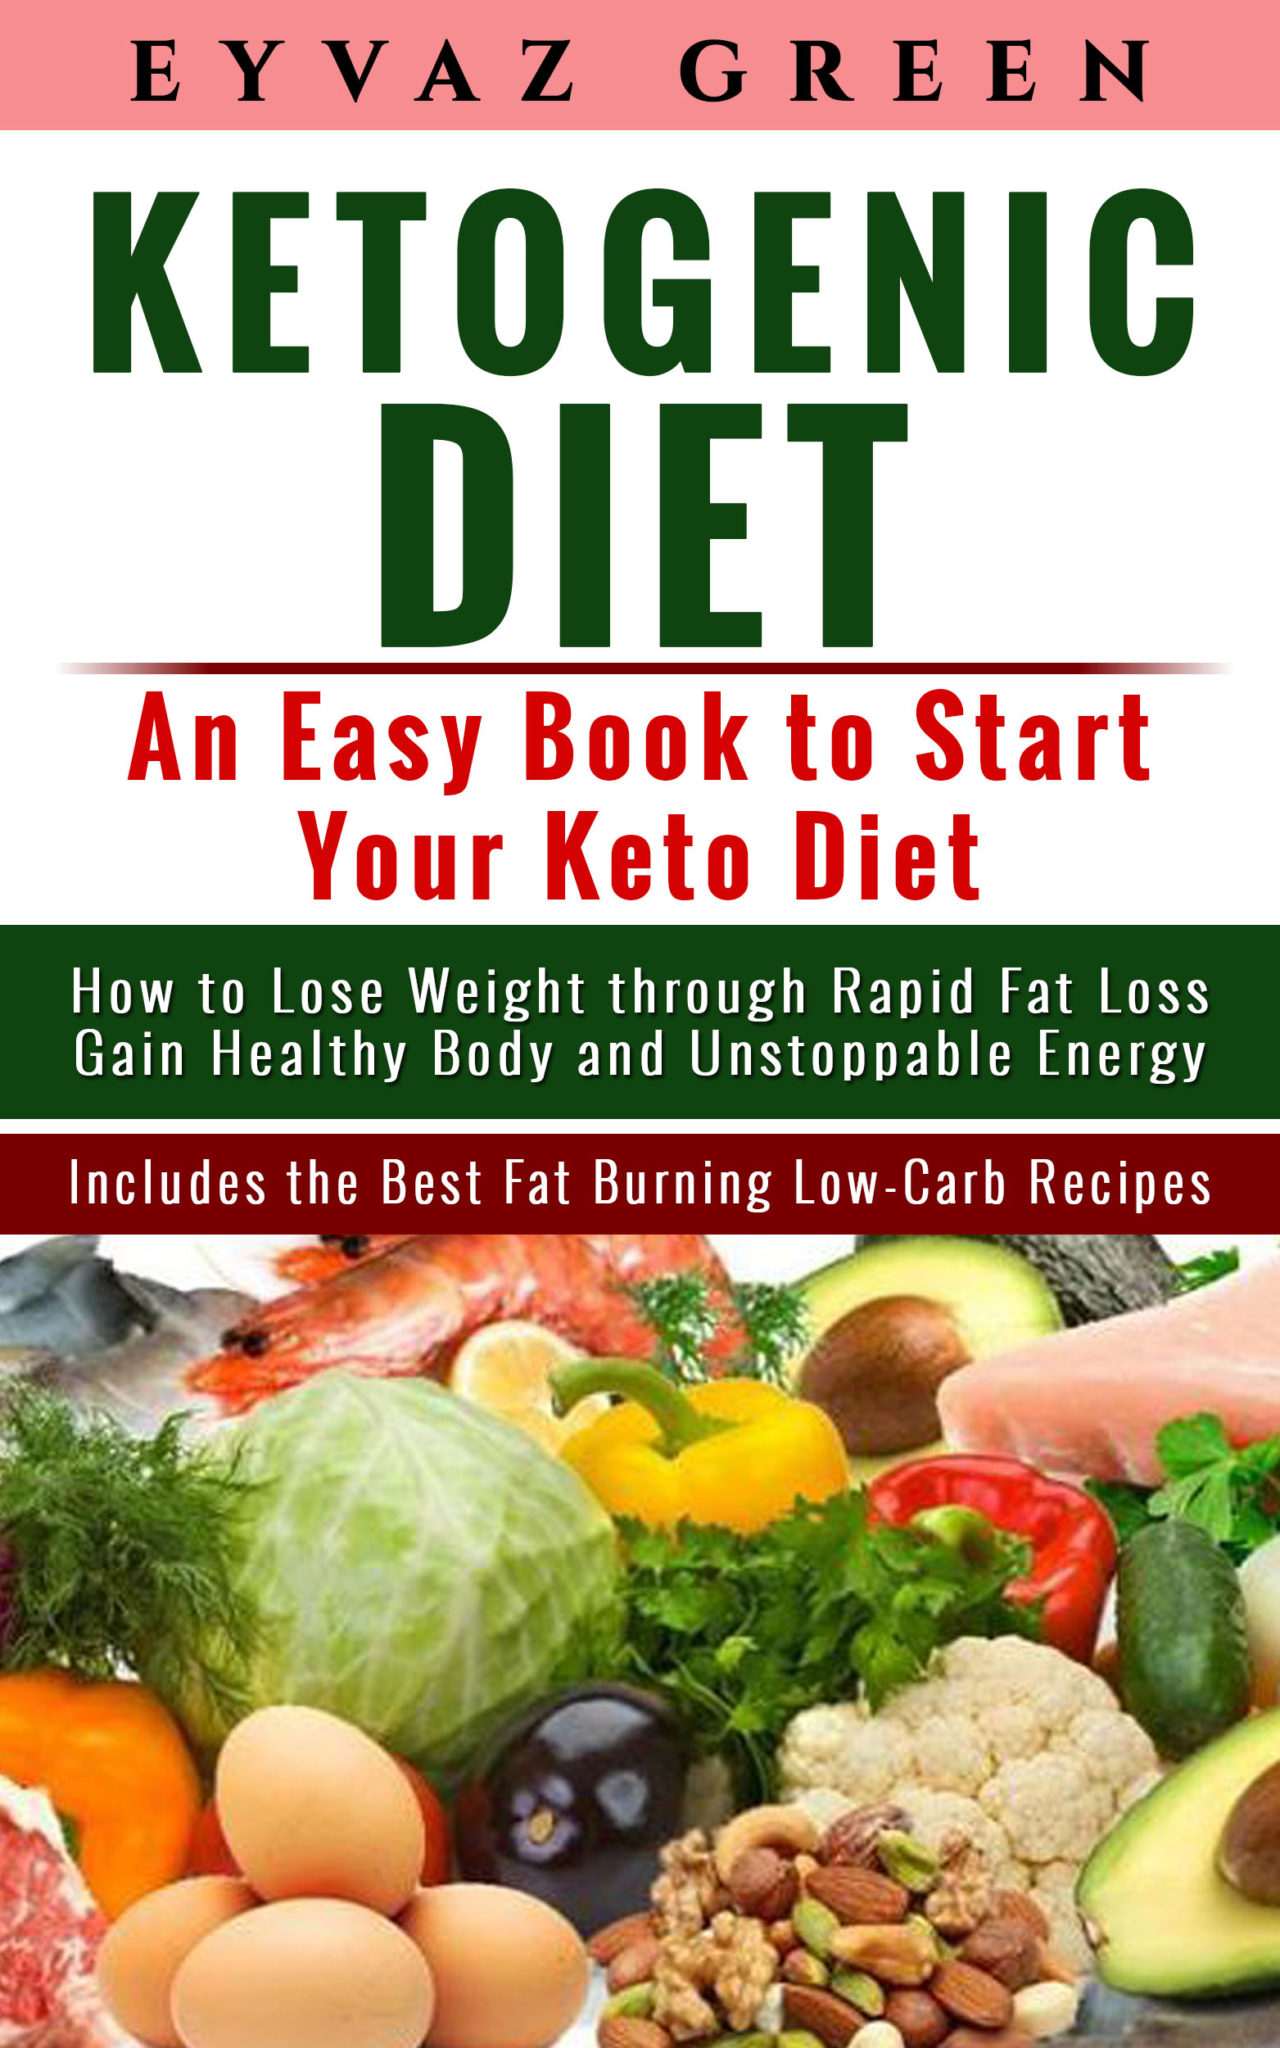 FREE: Ketogenic Diet: An Easy Book to Start Your Keto Diet. How to Lose Weight through Rapid Fat Loss Gain Healthy Body and Unstoppable Energy Includes the Best Fat Burning Low-Carb Recipes. by Eyvaz Green